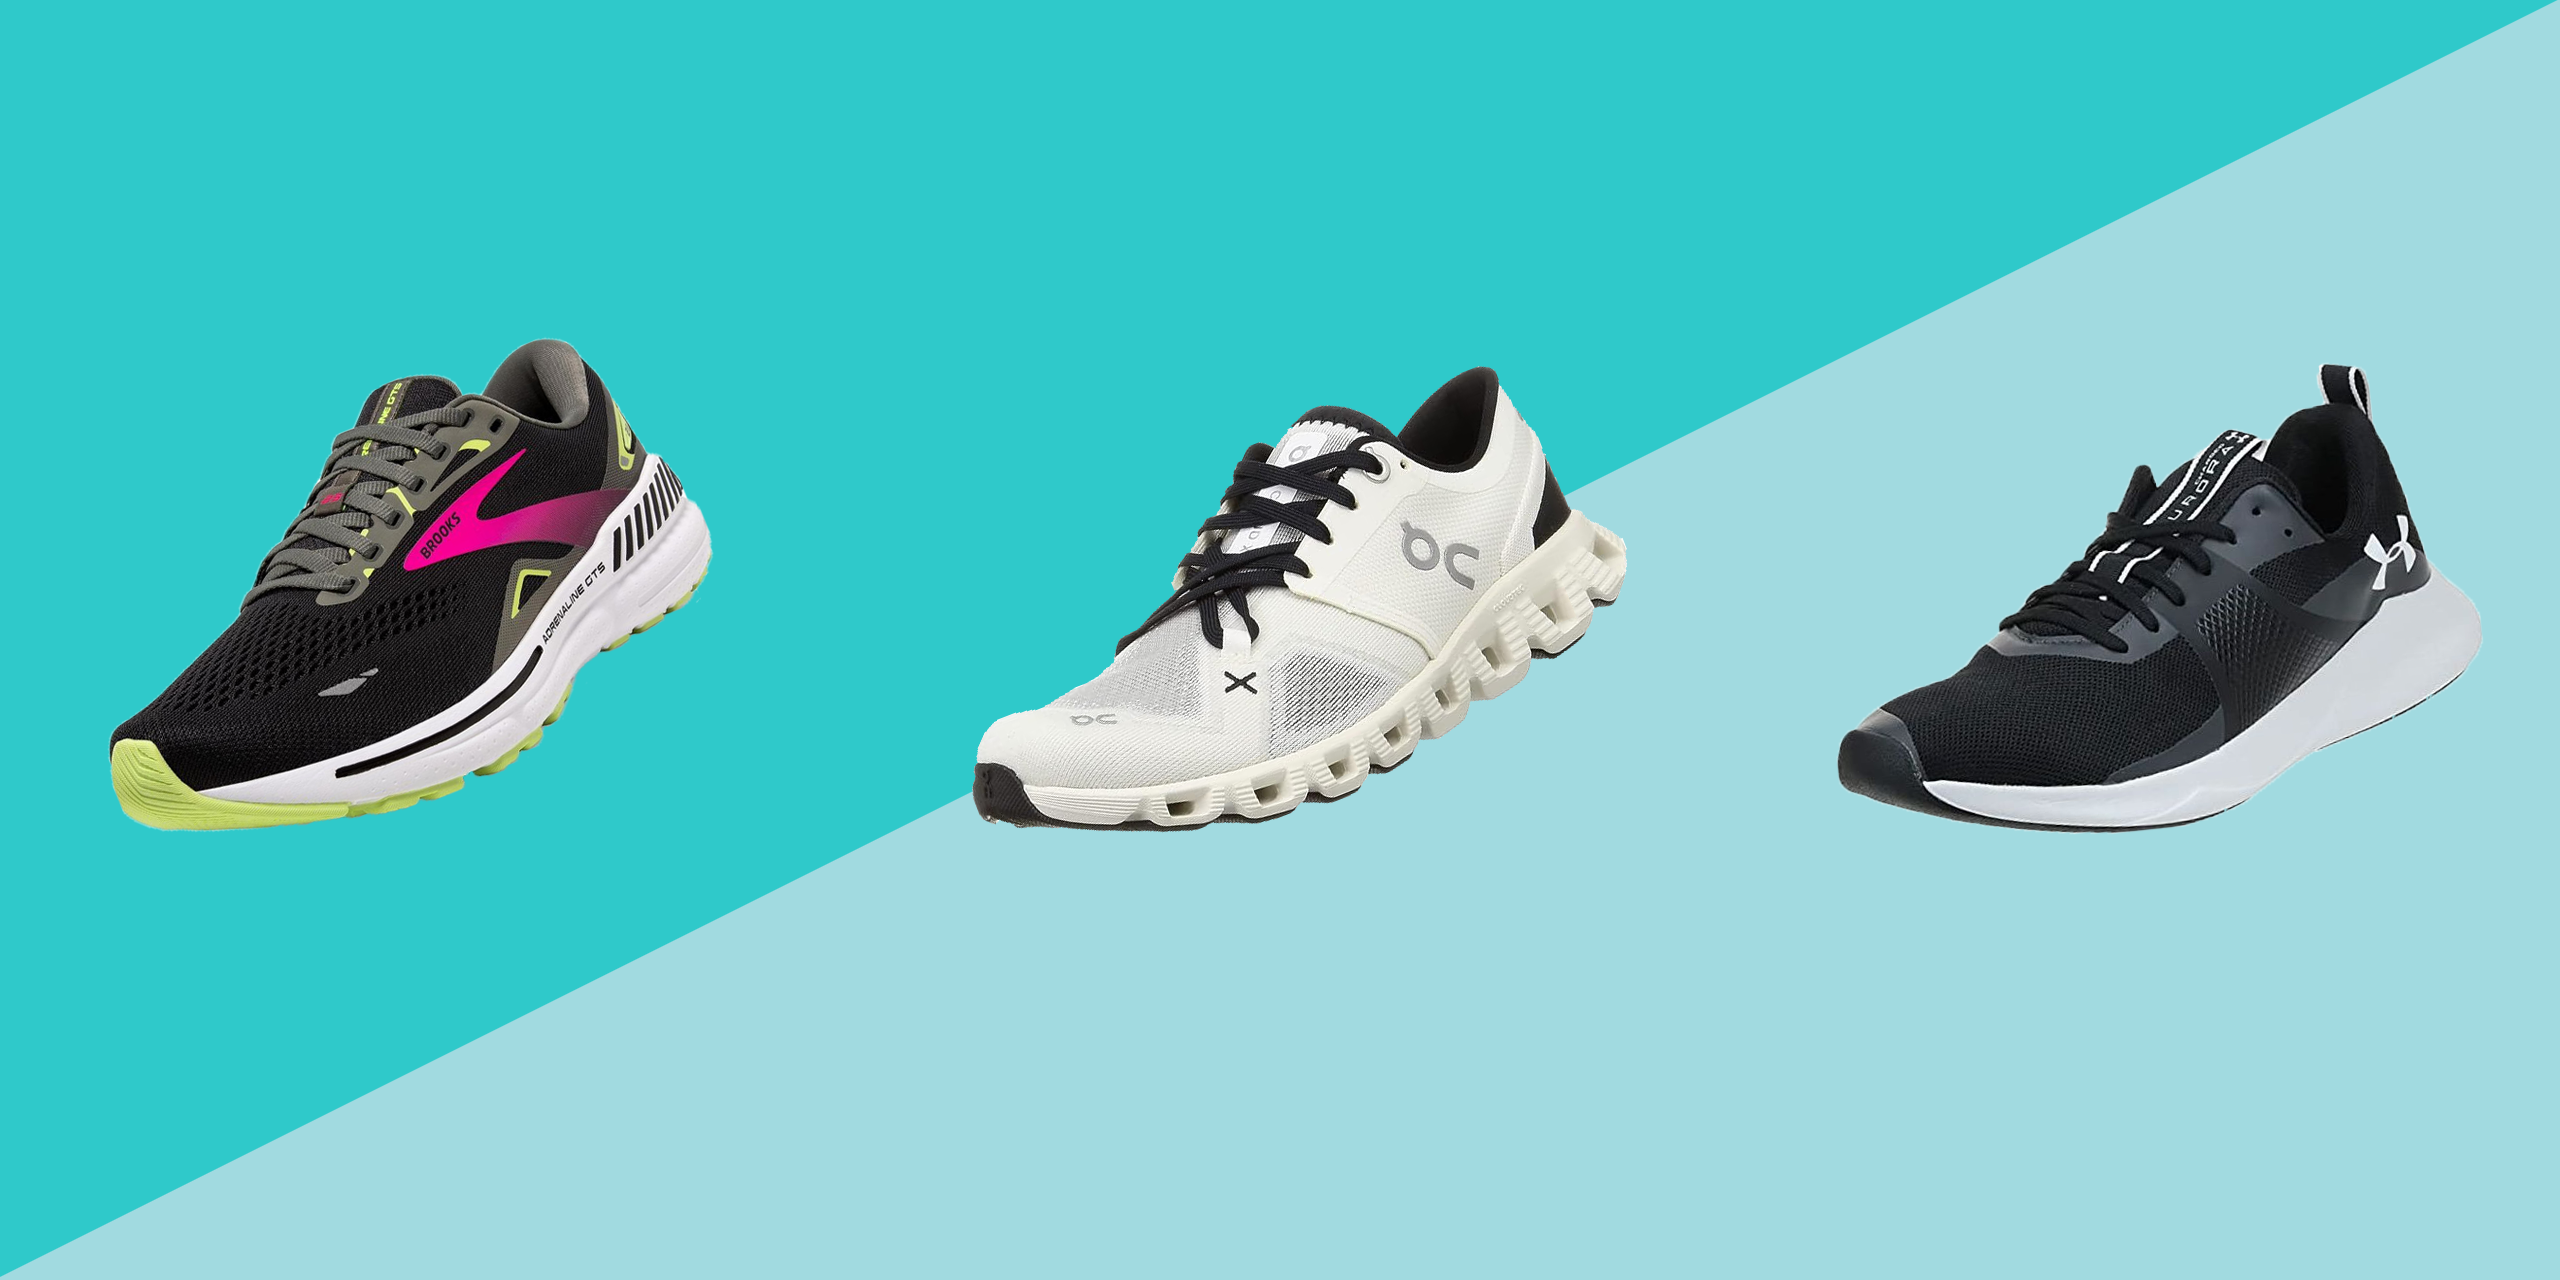 10 Comfortable Cross Trainer Shoes To Inspire You To Workout.